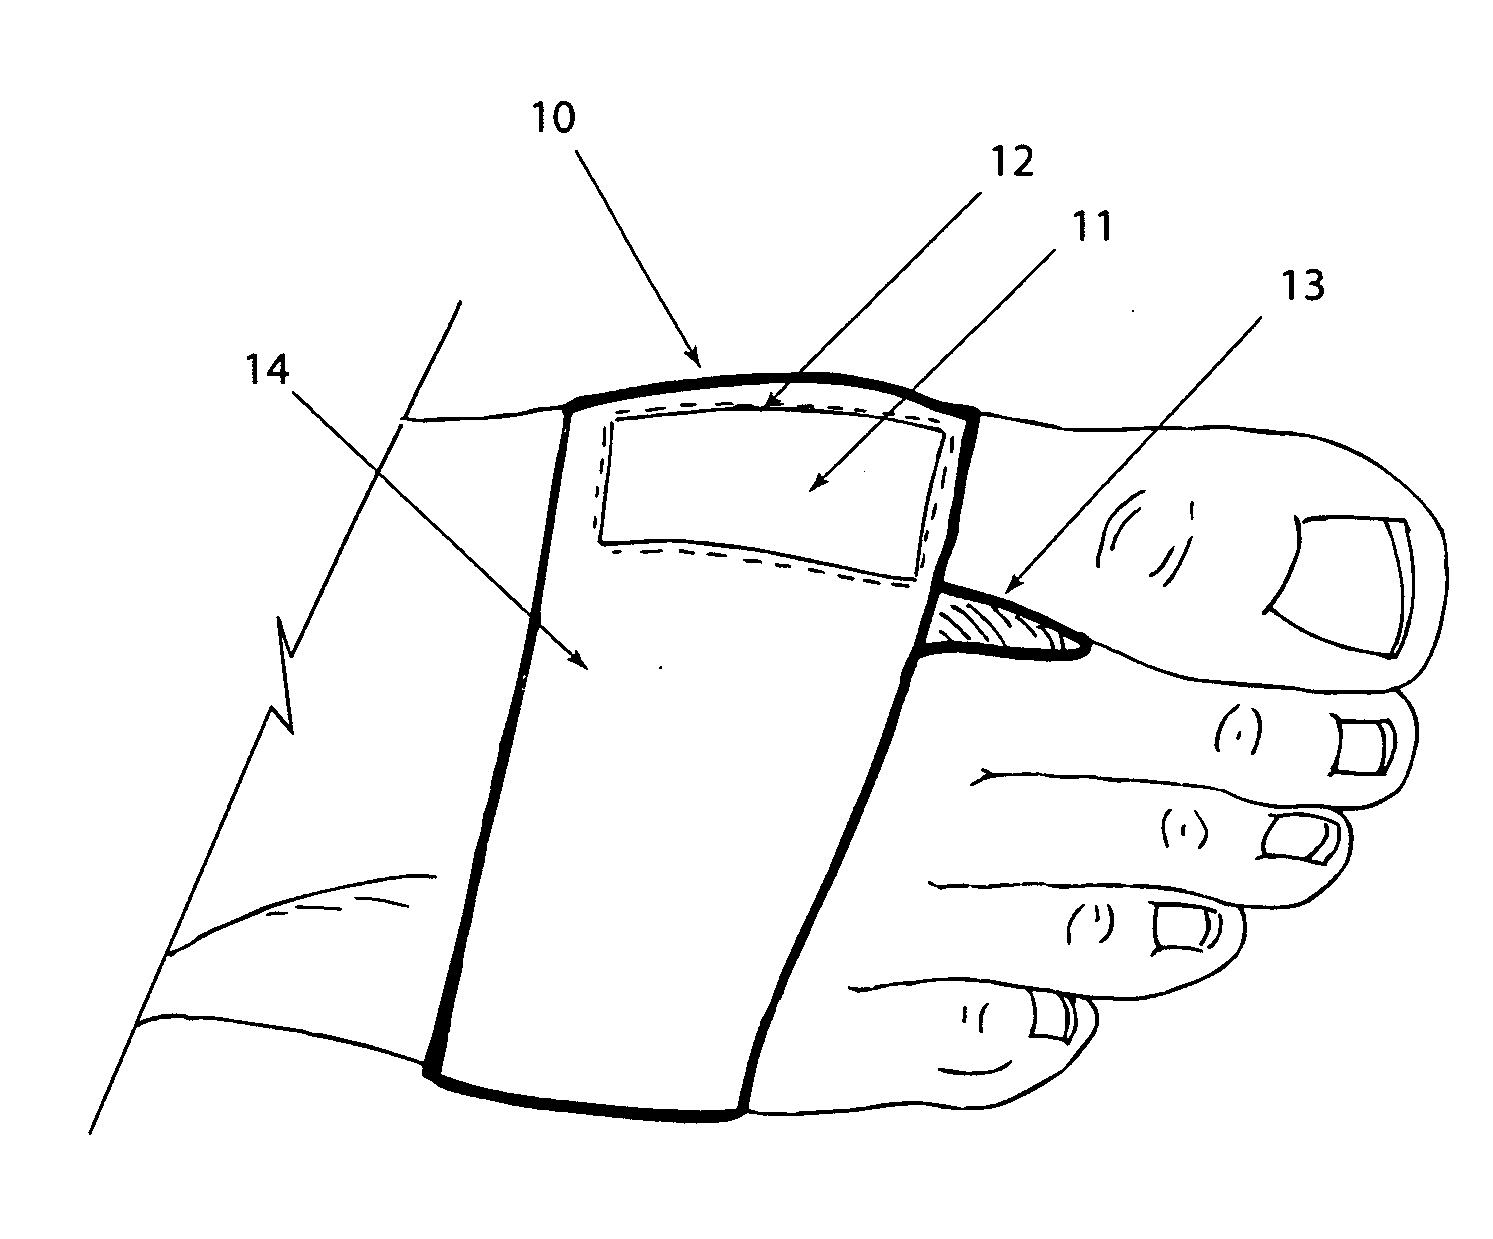 Orthotic device and method of use